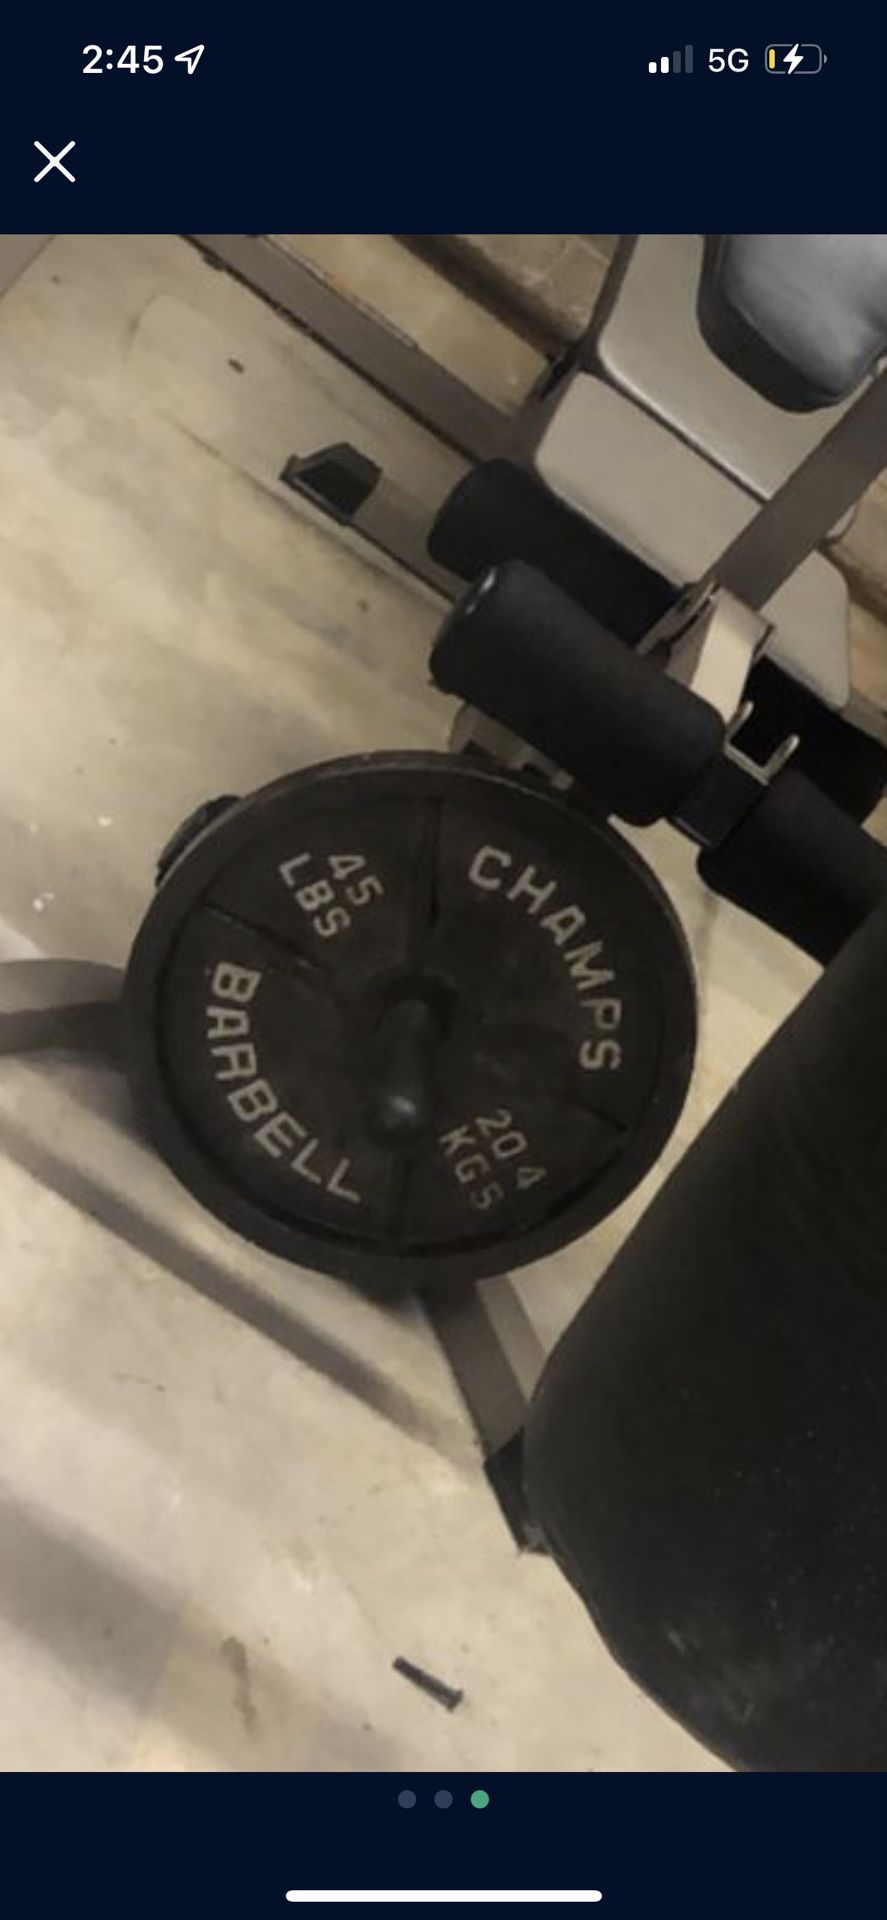 Weights Set Of 45 Lb Plates 